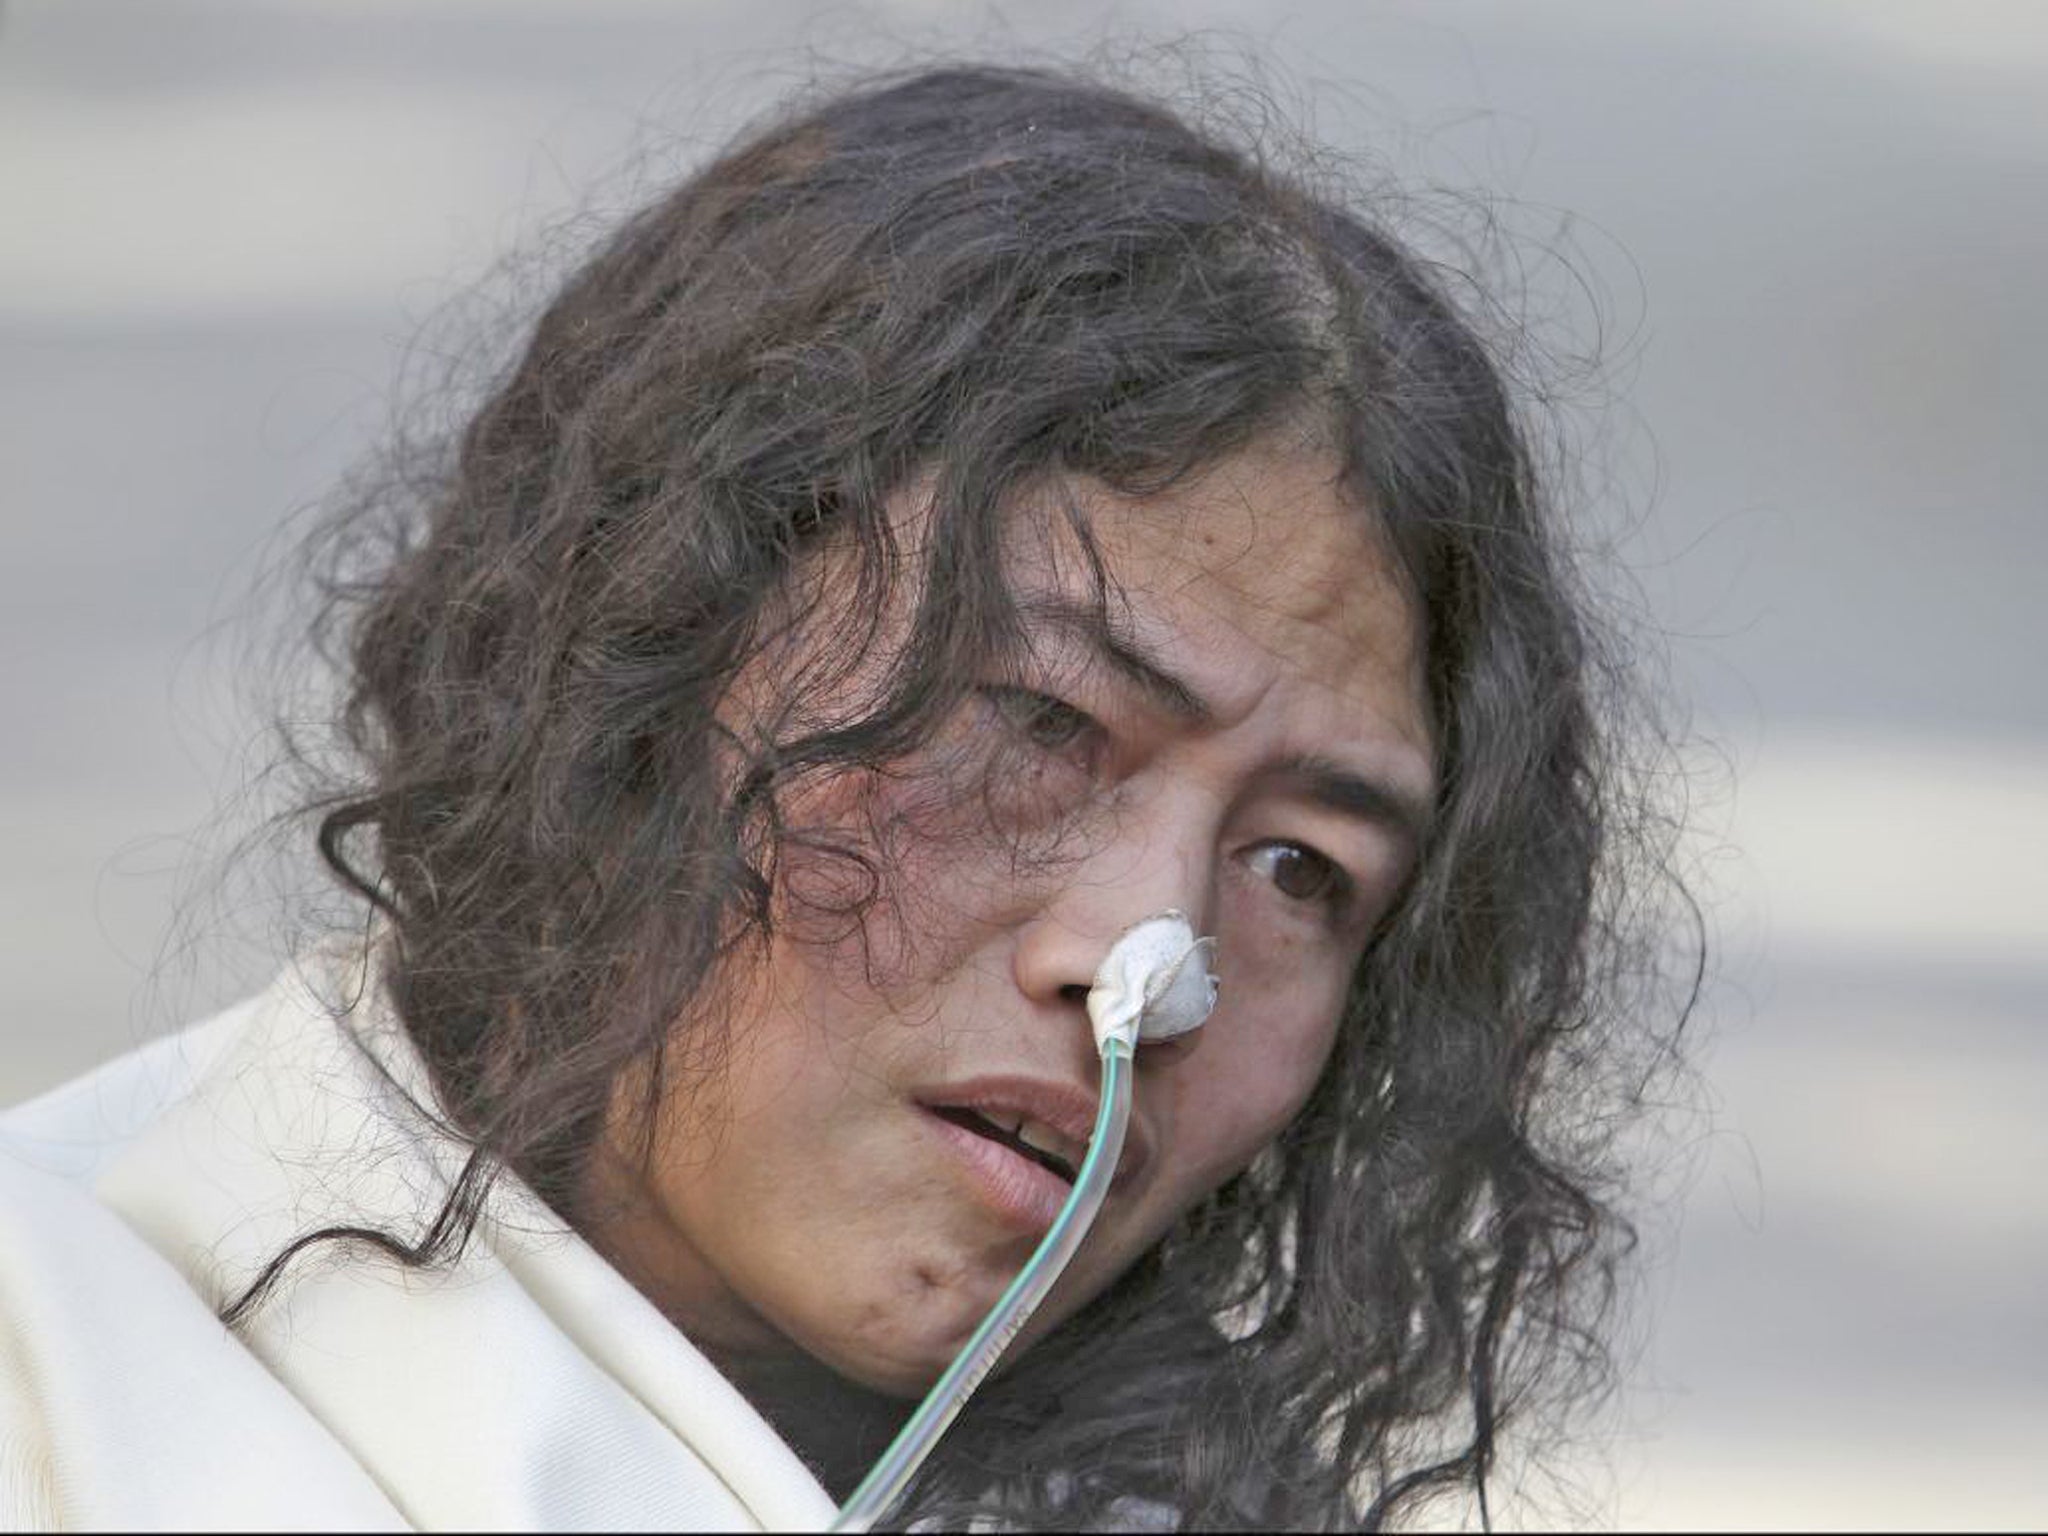 Irom Sharmila launched her fast in November 2000 to protest over the killing of a group of civilians by paramilitary forces